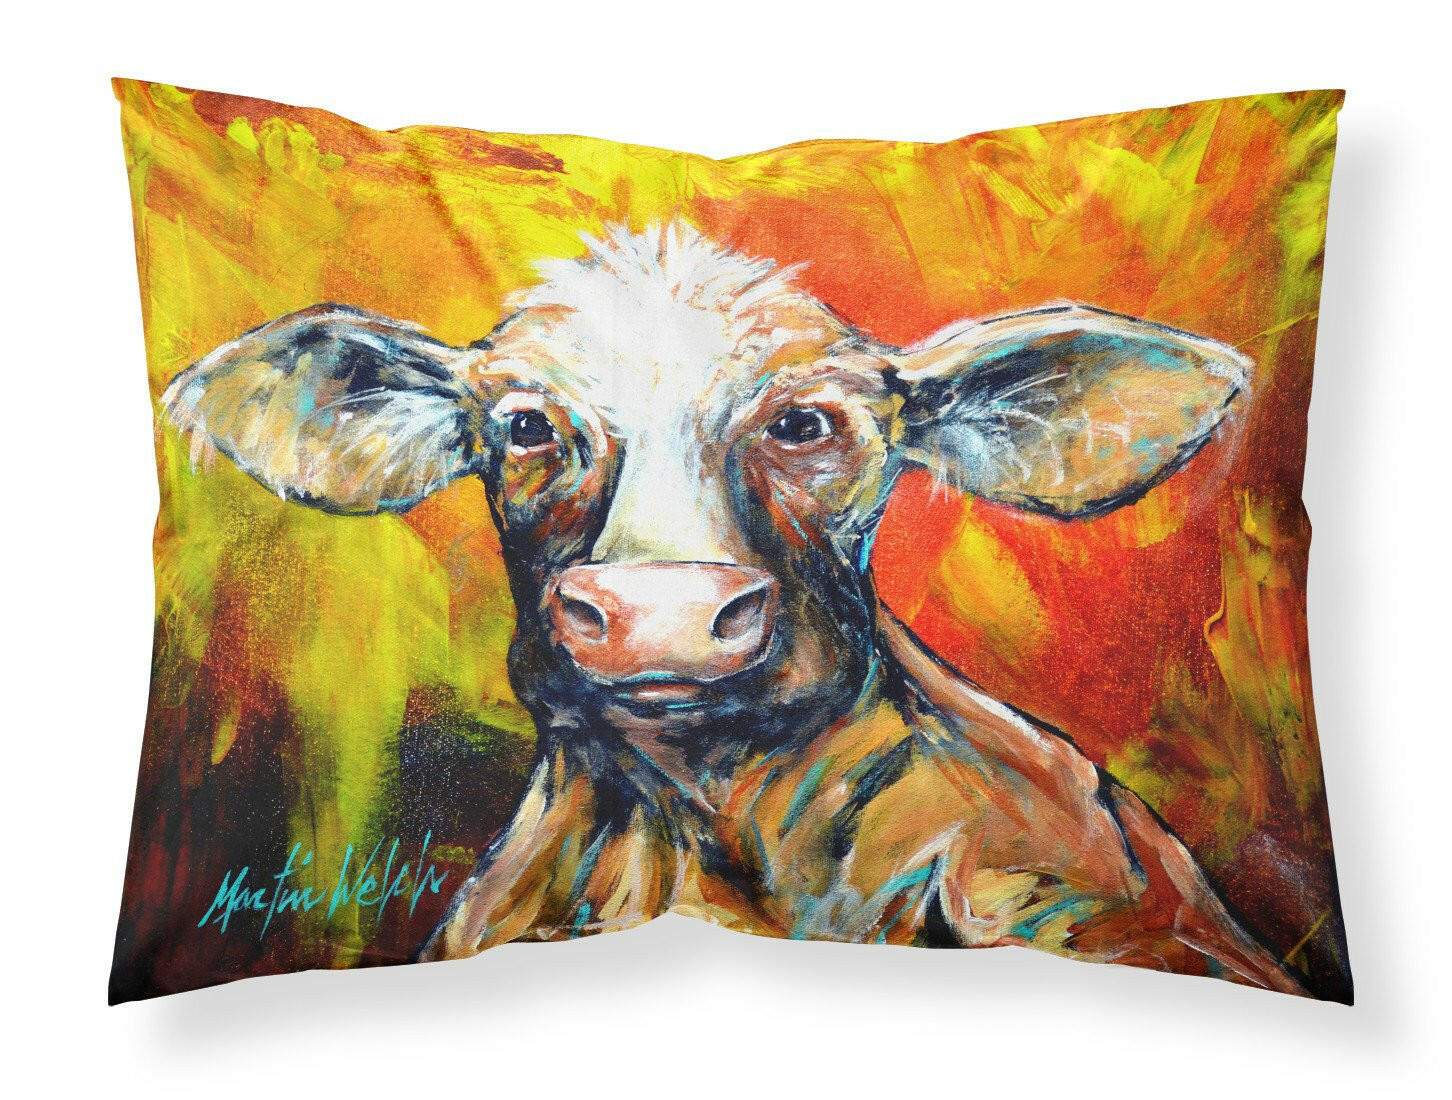 Another Happy Cow Fabric Standard Pillowcase MW1225PILLOWCASE by Caroline's Treasures